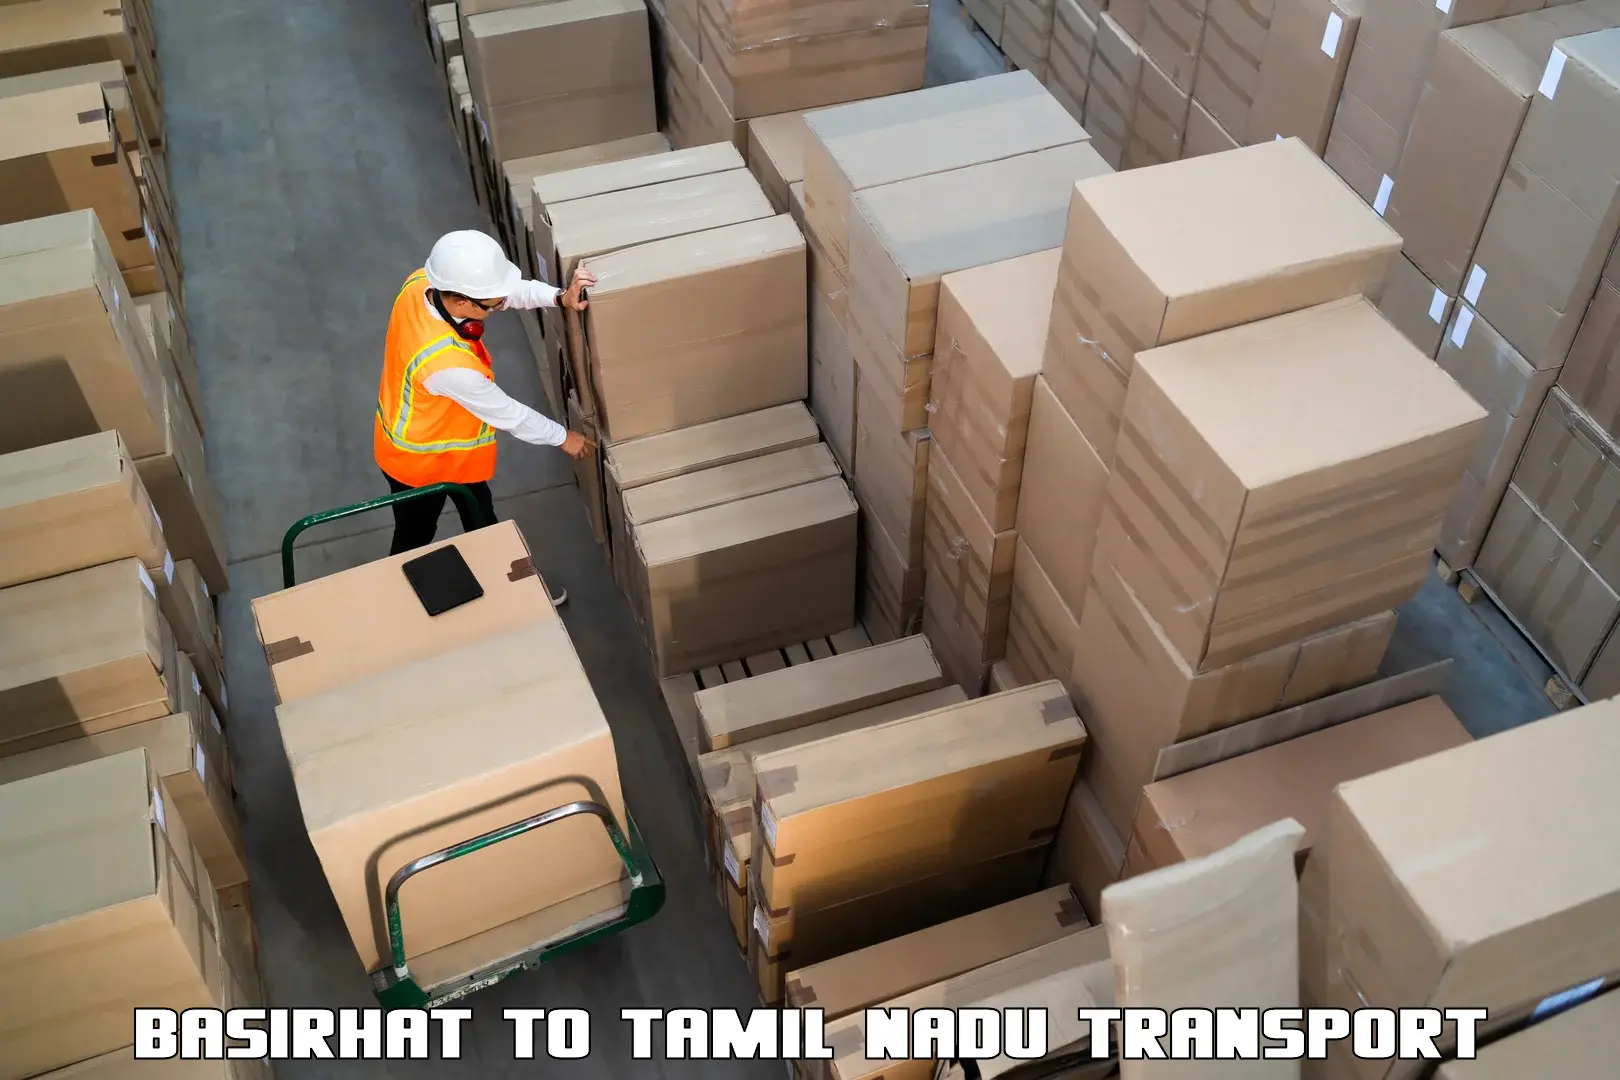 Container transport service Basirhat to Ennore Port Chennai